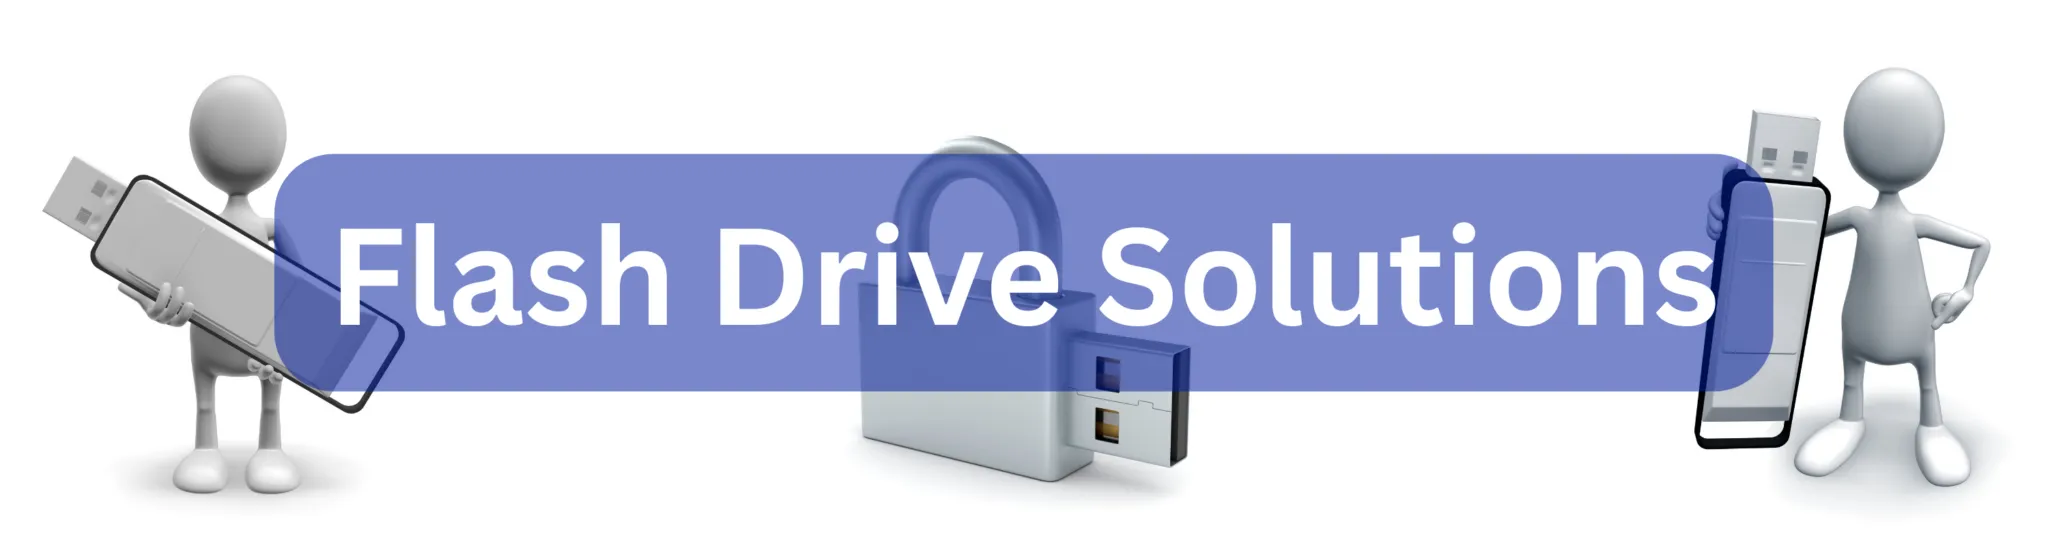 Flash-Drive-Solutions-Banner-2048x546